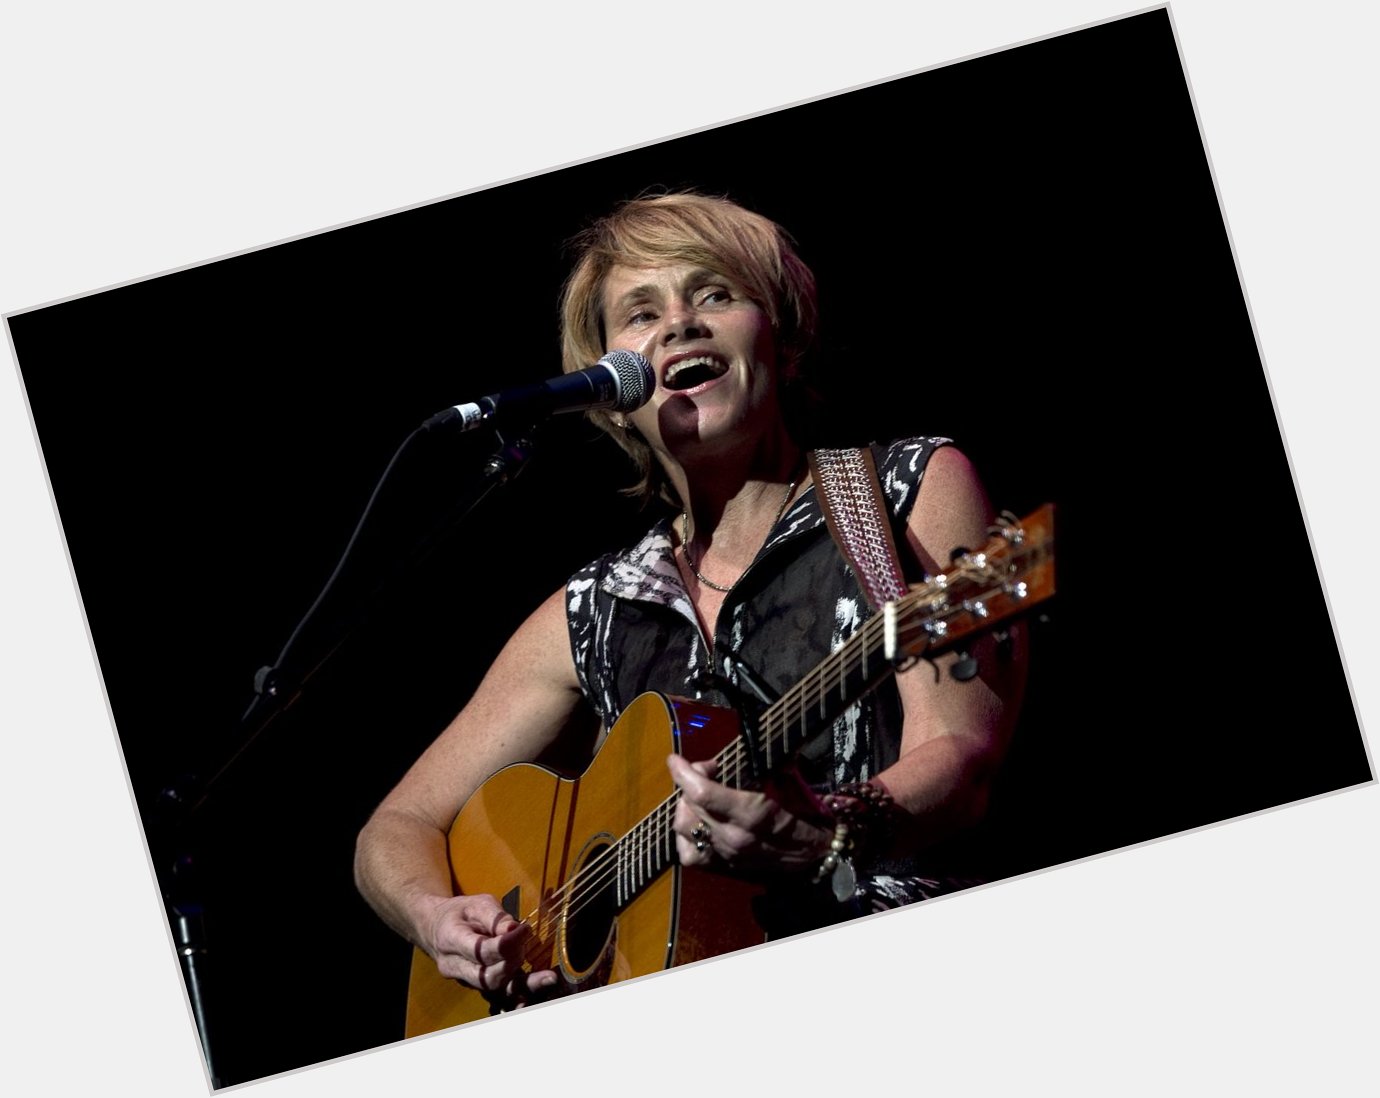 Wishing Shawn Colvin (Sunny Came Home) a very HAPPY BIRTHDAY today! 